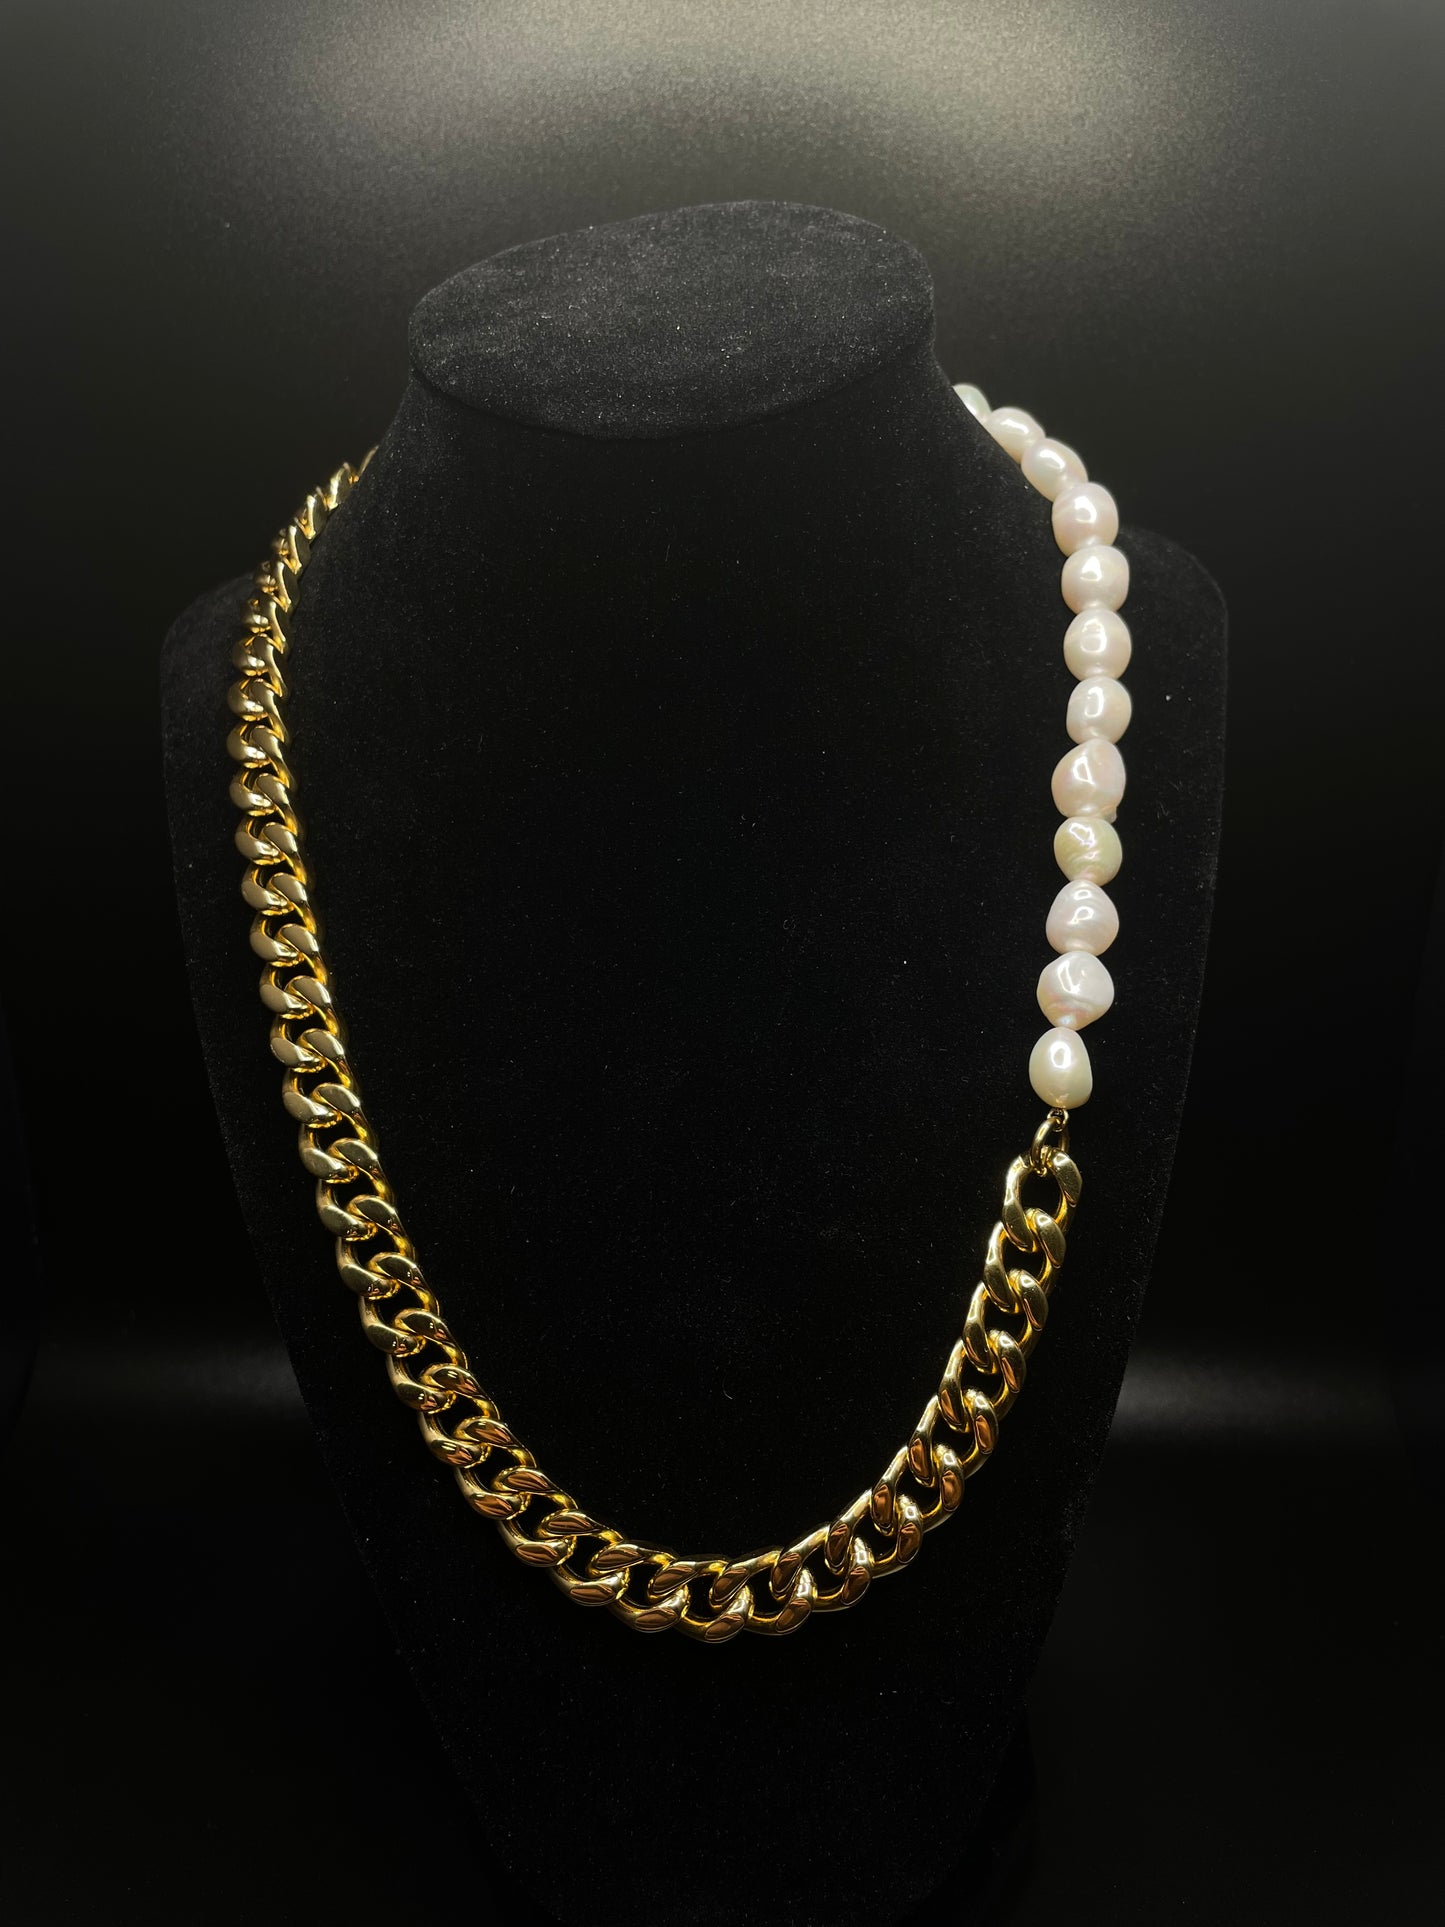 10mm 18k Gold/White Gold Cuban Pearl